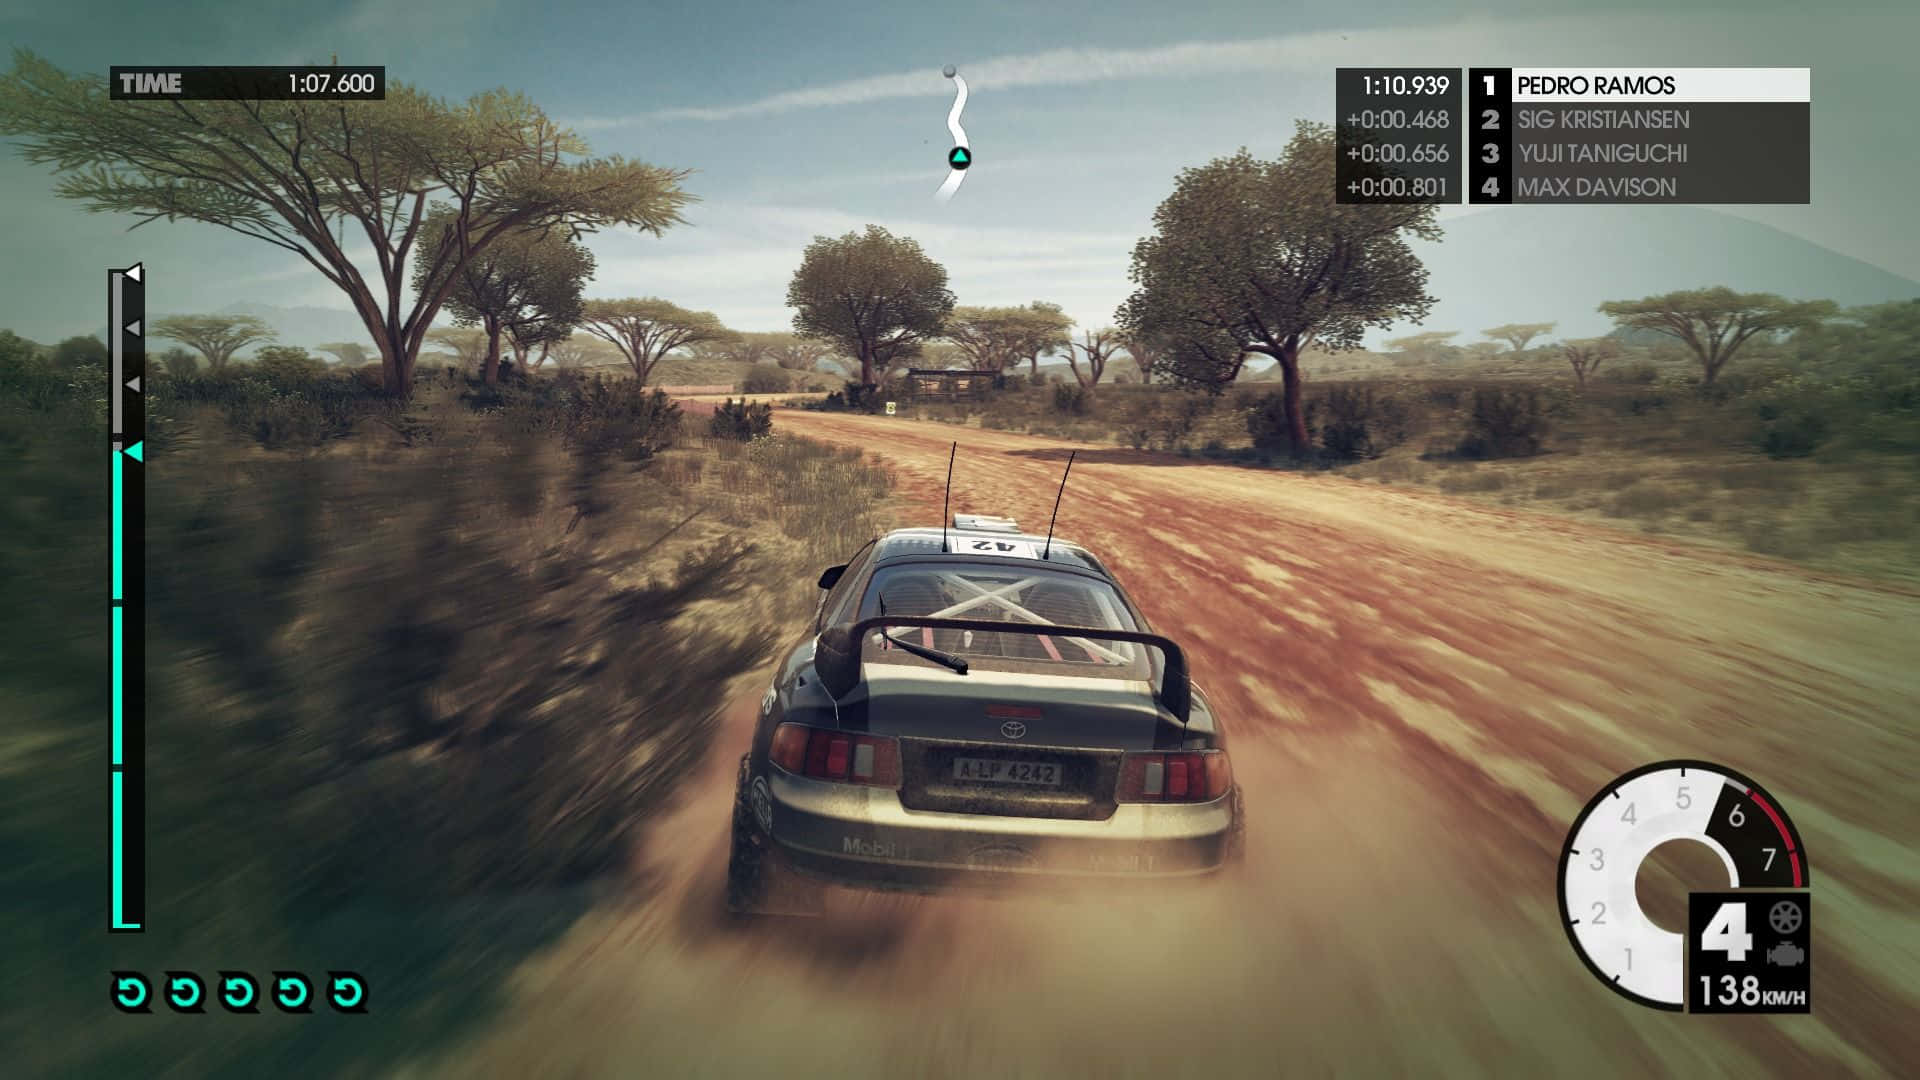 Get ready to thrill and experience the intense racing action with Dirt 3!